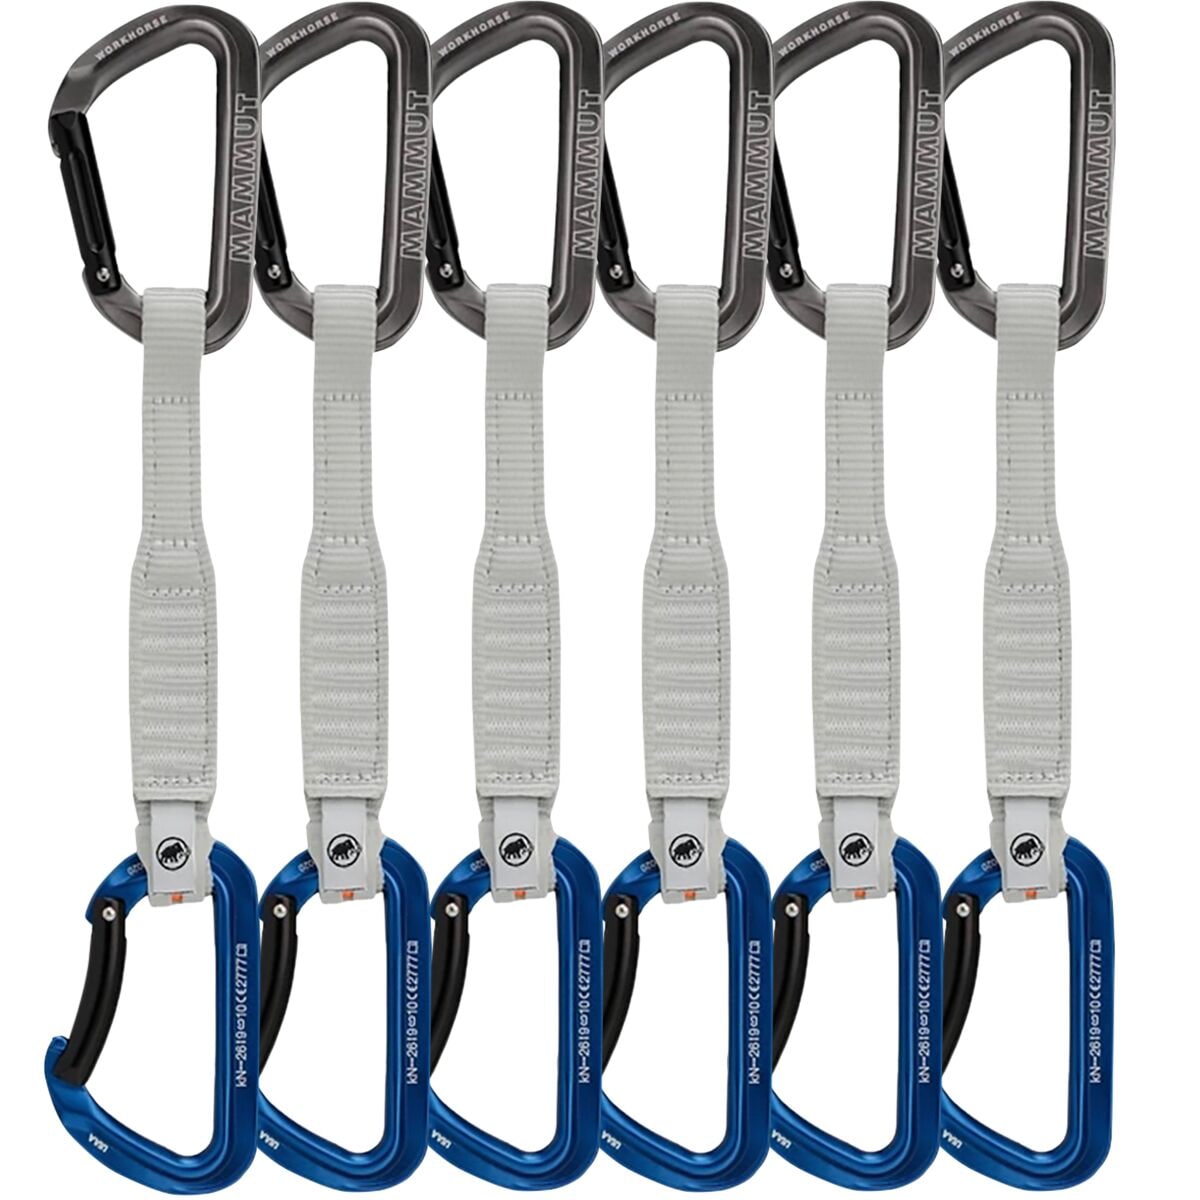 Photos - Outdoor Furniture Mammut Workhorse Keylock Quickdraw - 6-Pack 